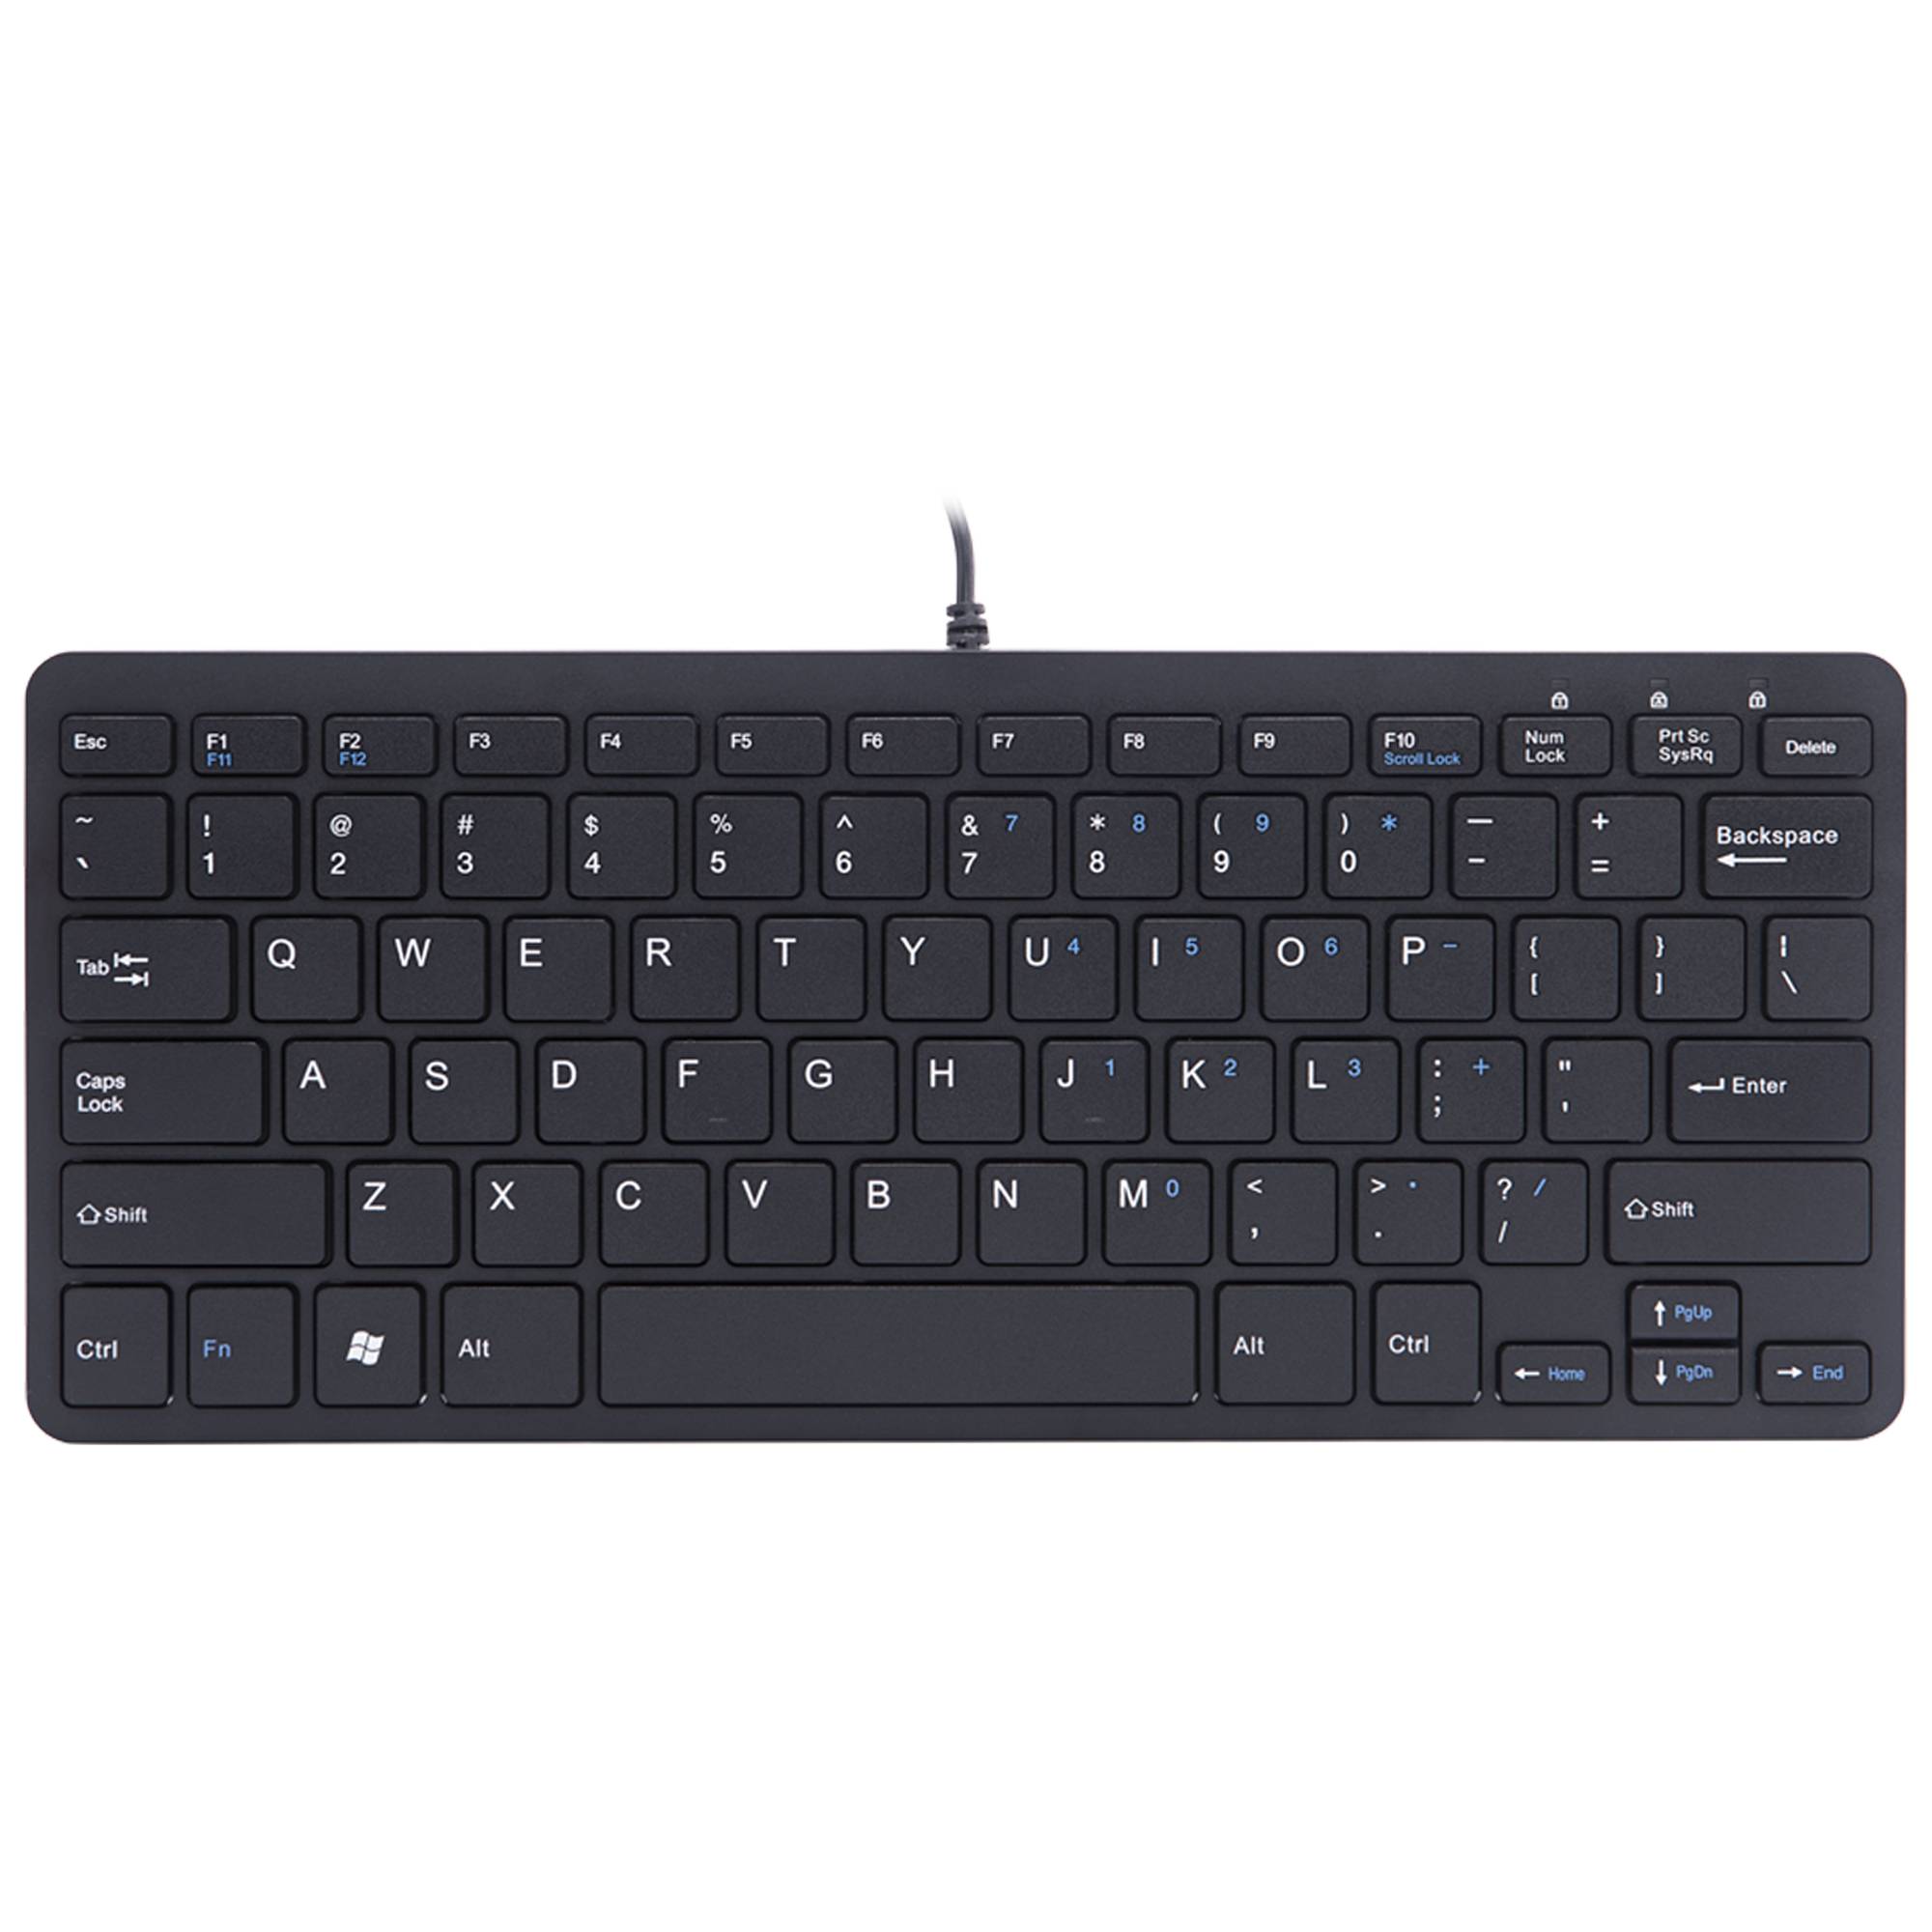 Rca Informatique - Image du produit : R-GO COMPACT KEYBOARD US LAYOUT QWERTY BLK WIRED